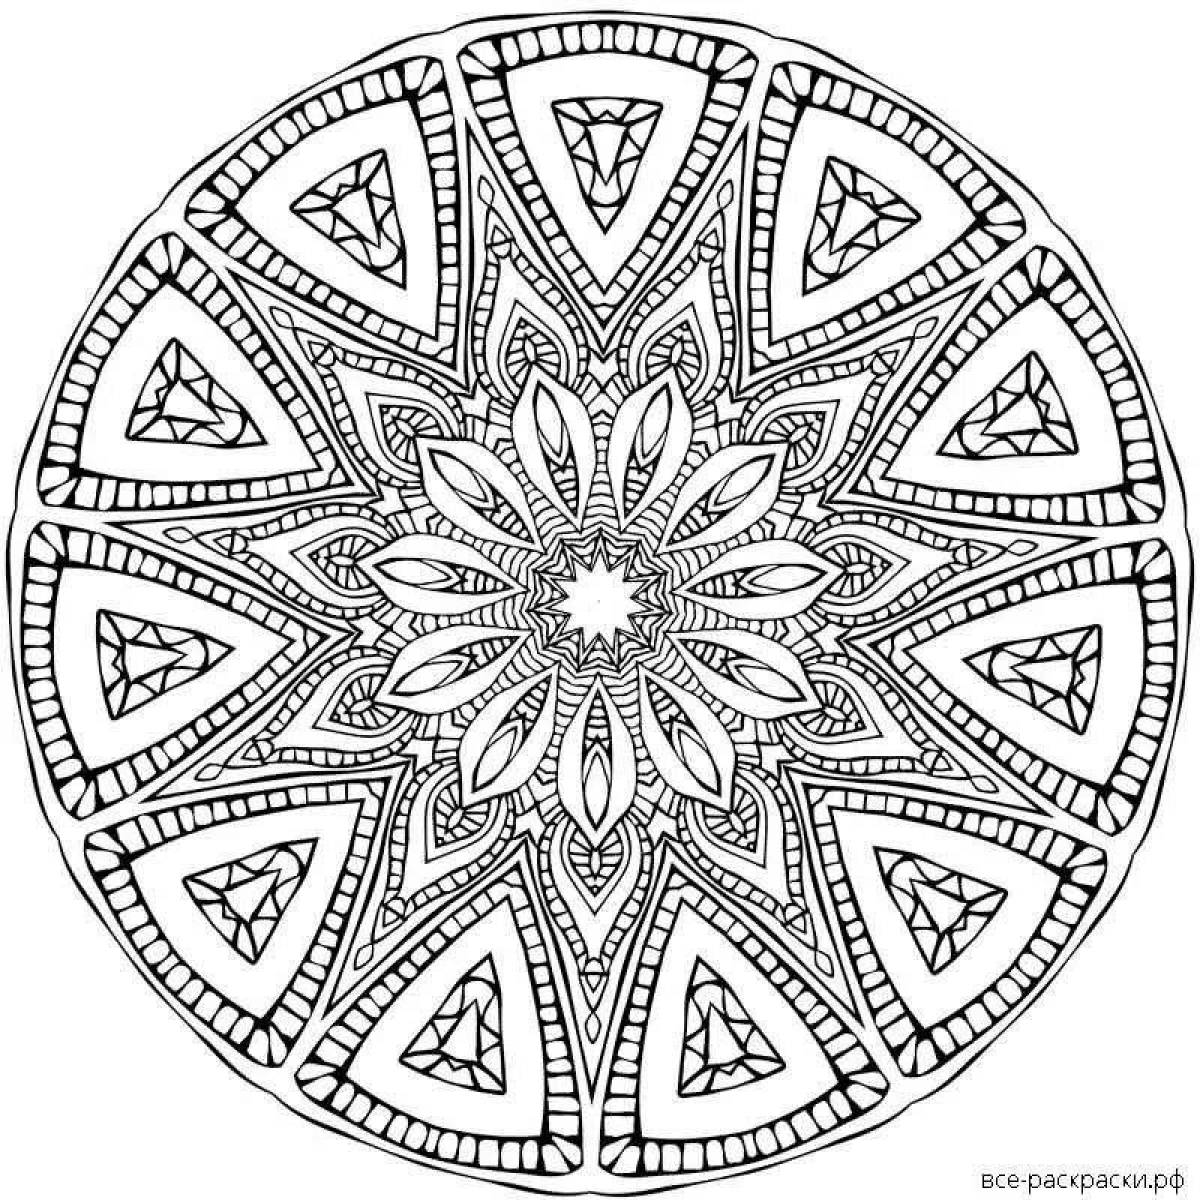 Colorful health and wellness mandala coloring page